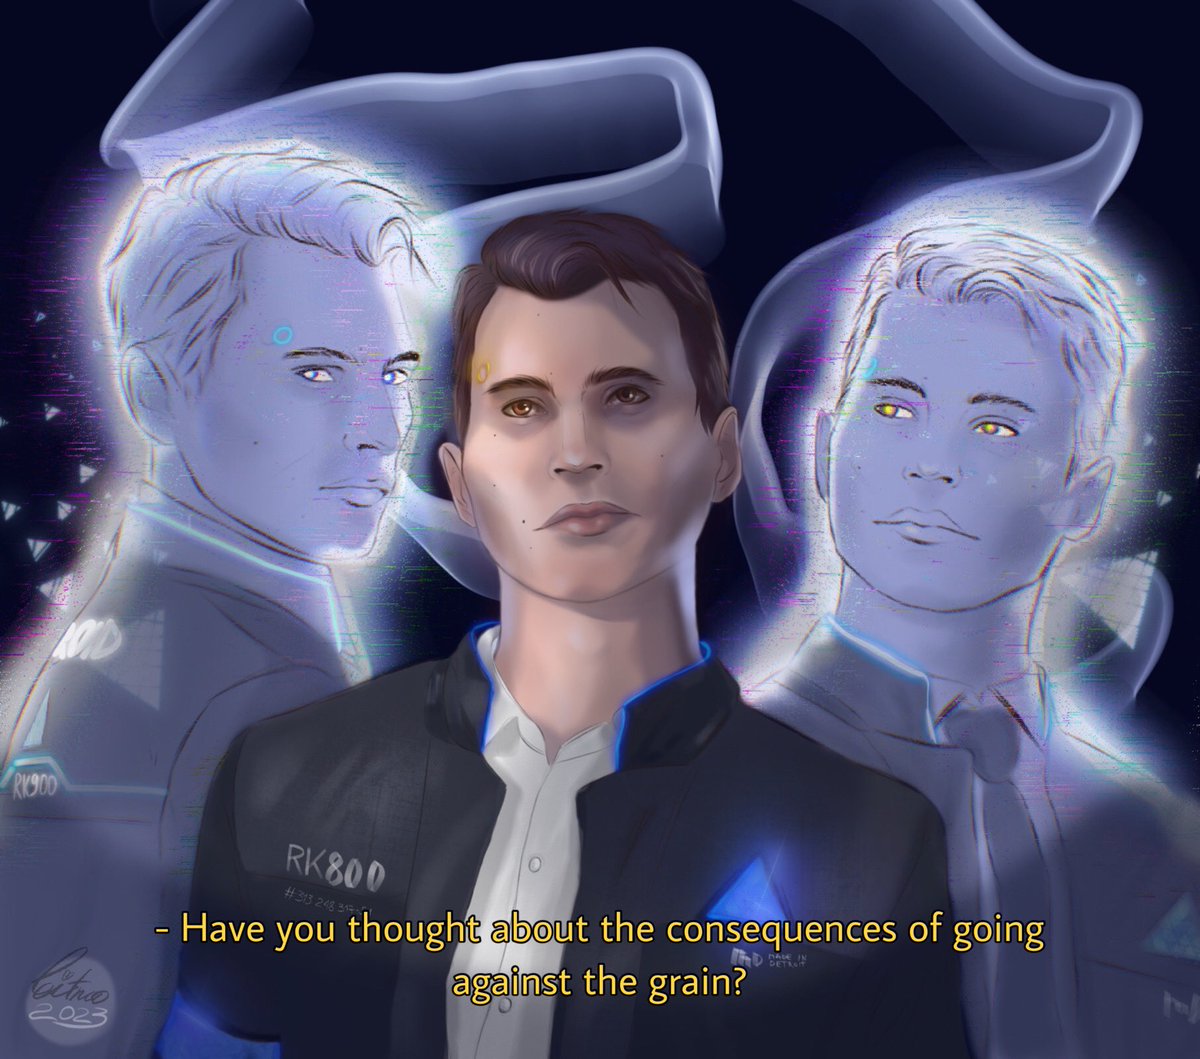 - Are you really disappointed? It's too hard for you to be alive, 51?.. 

So, was freedom worth it, big brother?

#DBH #DetroitBecomeHuman #DBHConnor #DBHfanart